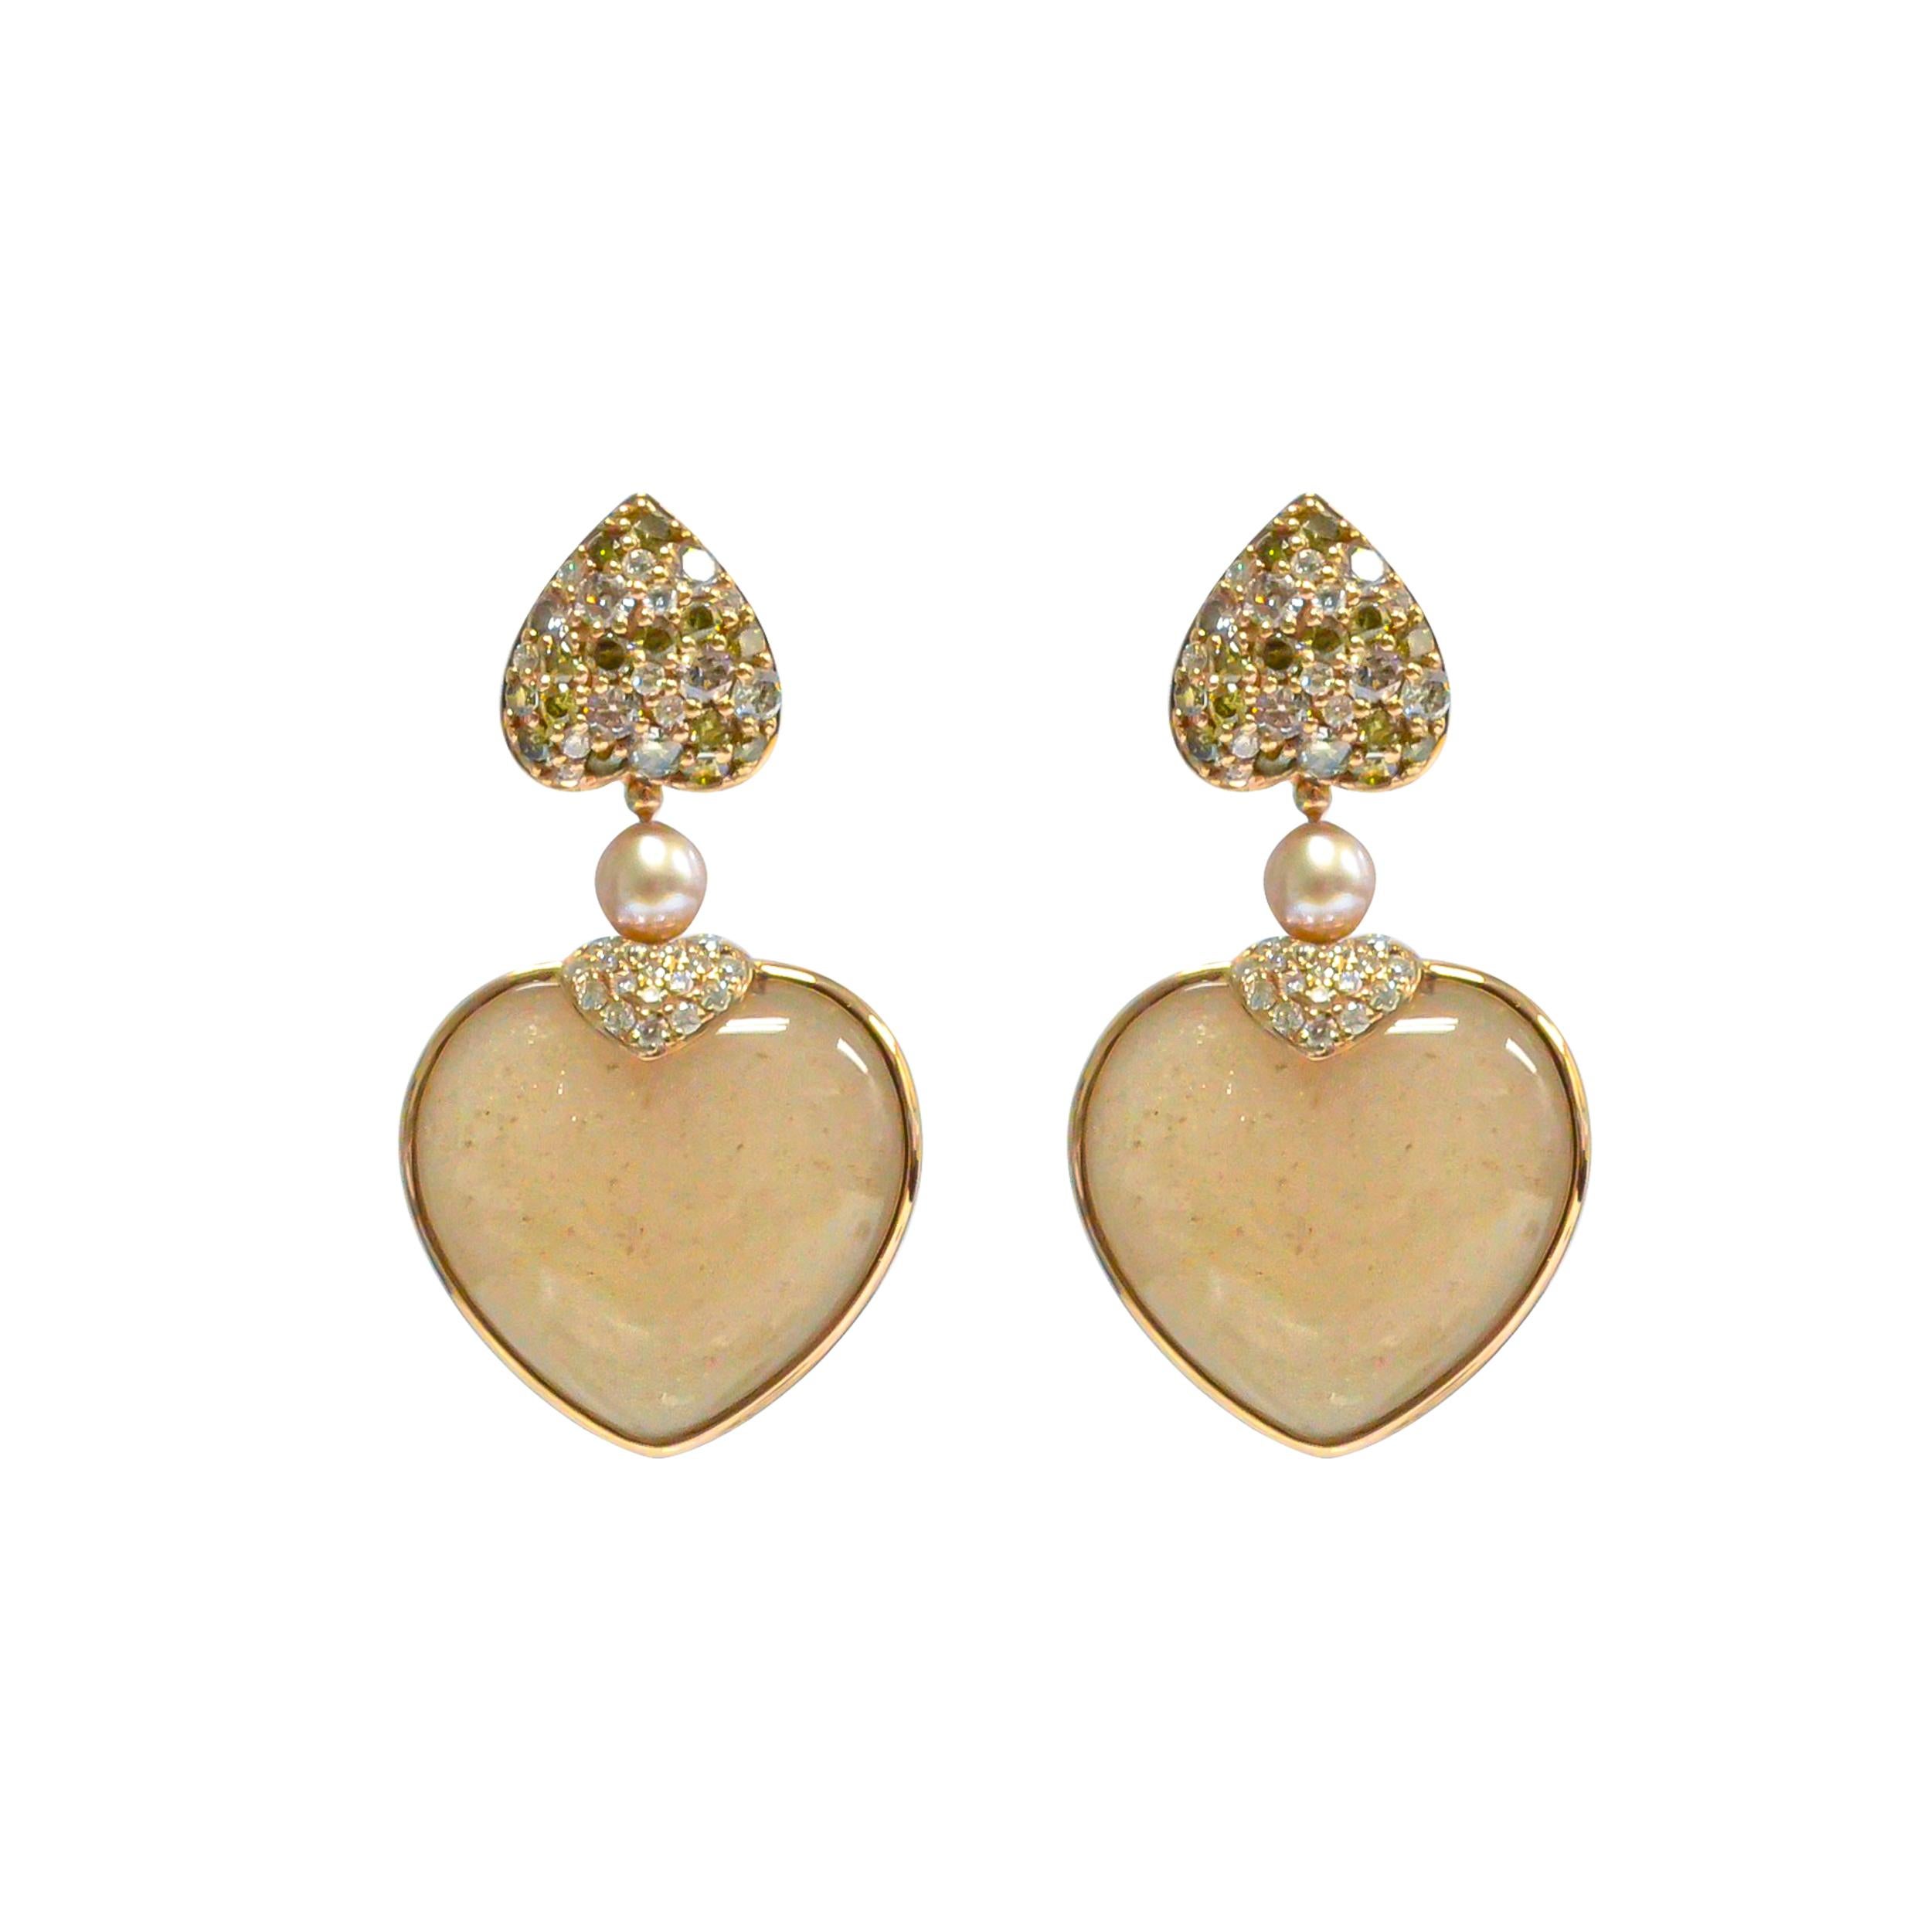 Celebrating the season of love with these cute and dainty heart shaped earrings! The earrings are two-sided and you can easily turn them as your heart desires! Light and easy to wear these earrings showcase beautiful opaque gemstones accented with